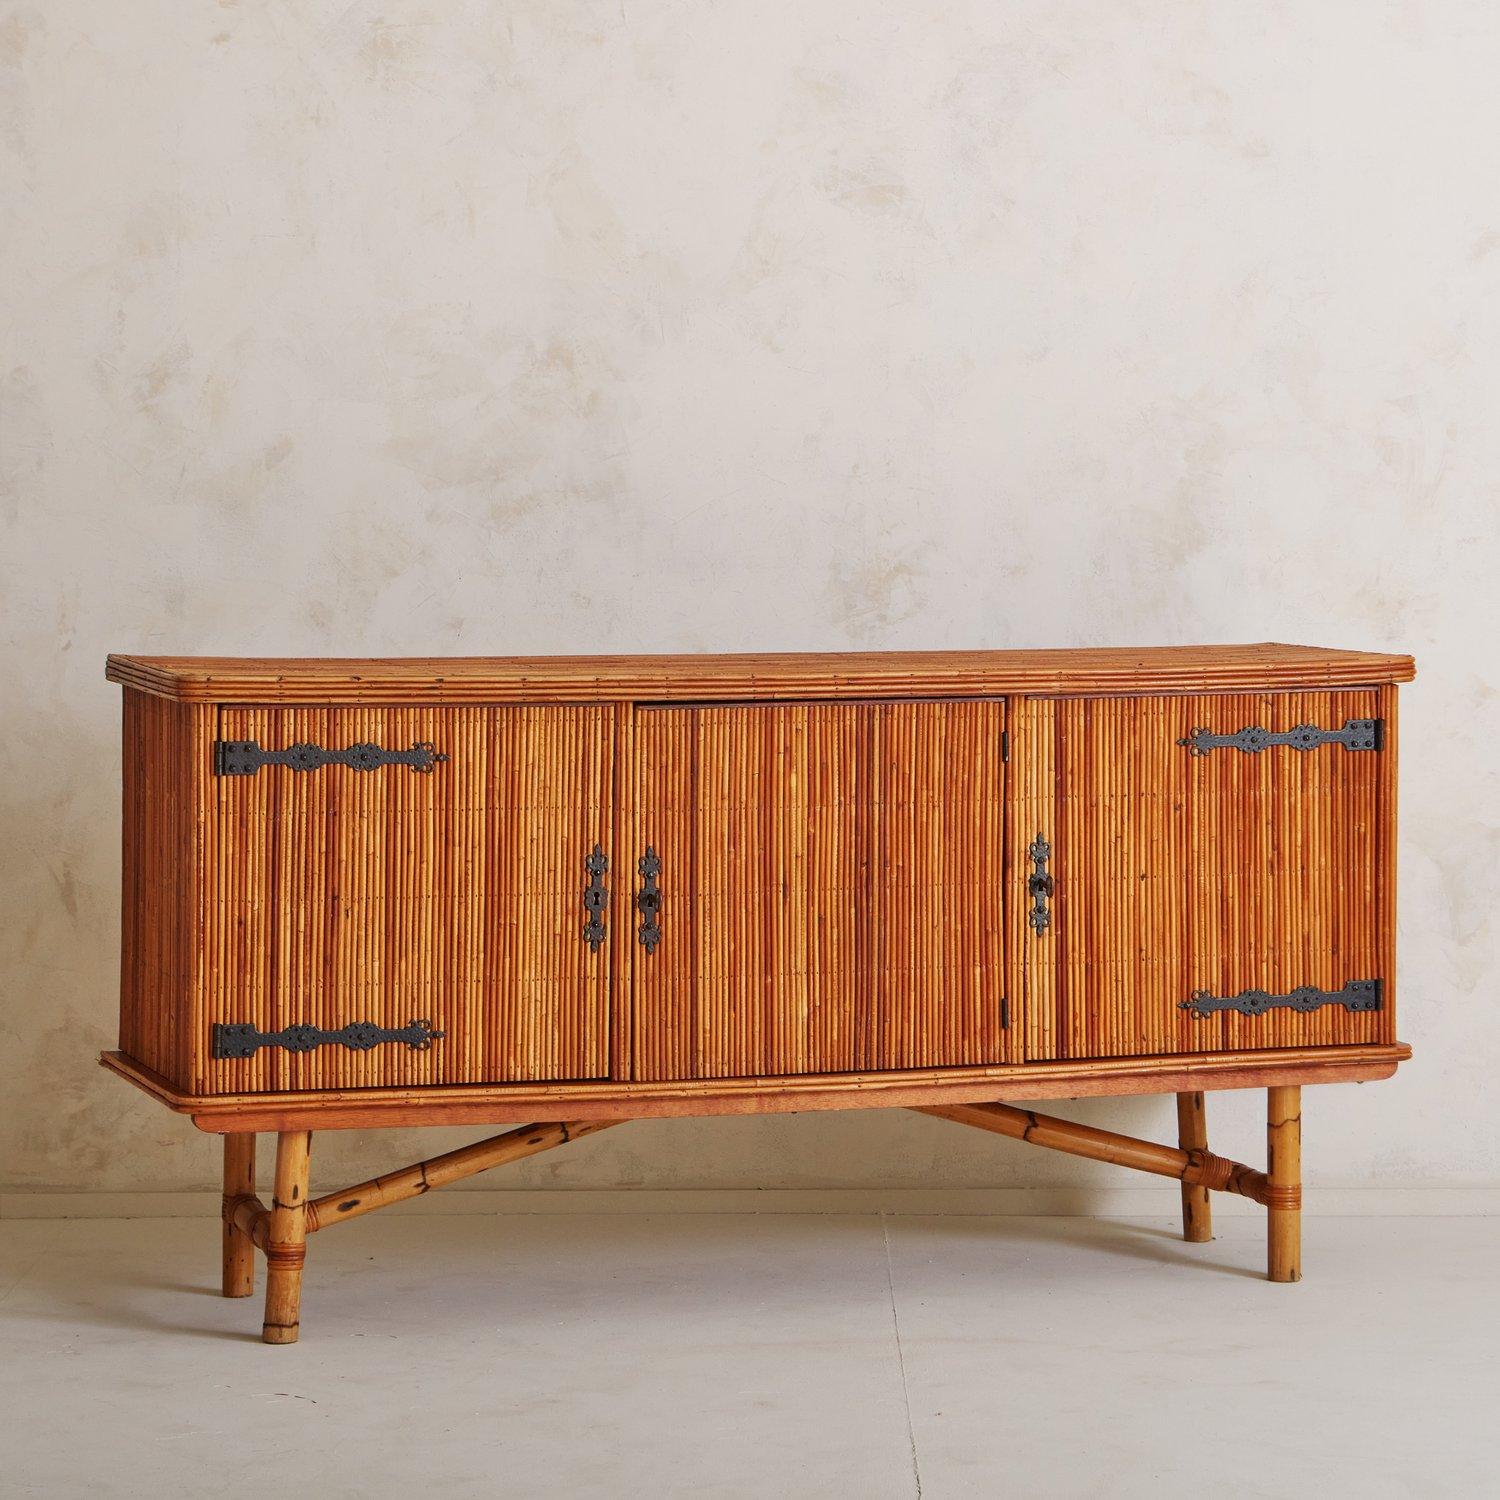 A 1950s French bamboo sideboard attributed to Audoux & Minet. This piece features hand-forged iron hardware and beautiful natural color variations in the bamboo. It has three cabinet doors which open to reveal a black painted interior with one